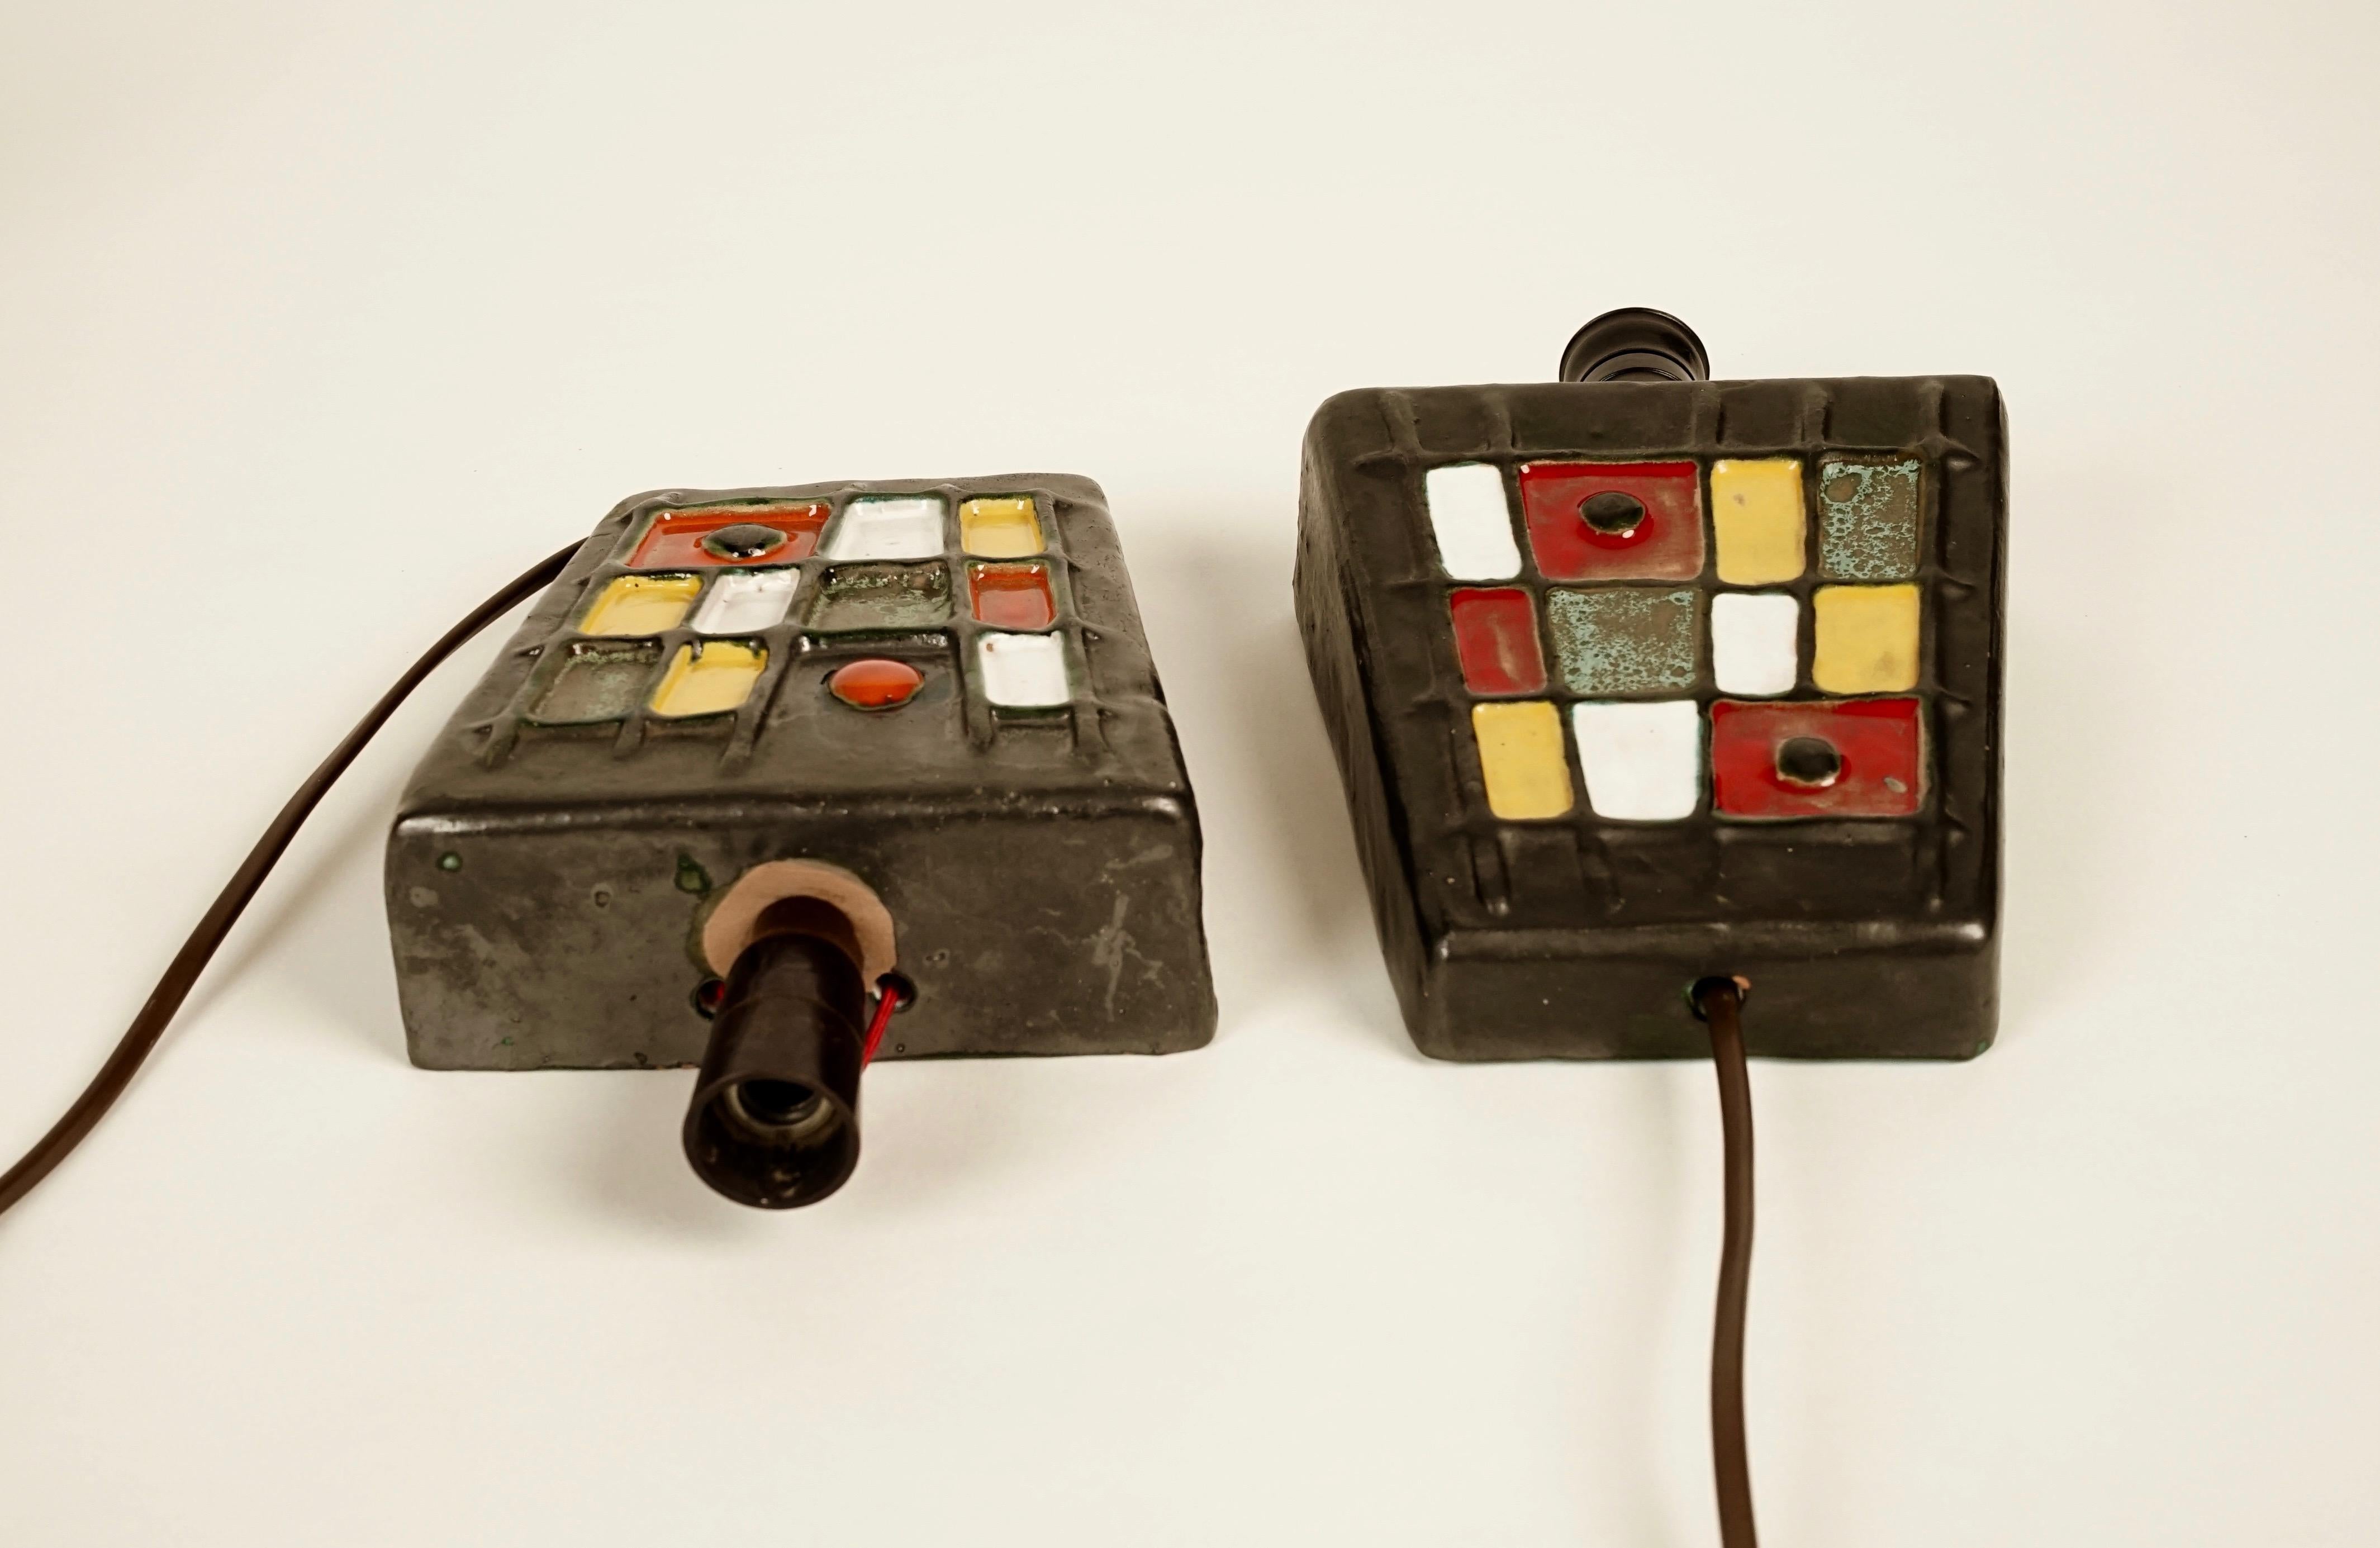 Hungarian Pair of Modernist Wall Lights, From the Studio Ceramics Movement, 1950s Hungary